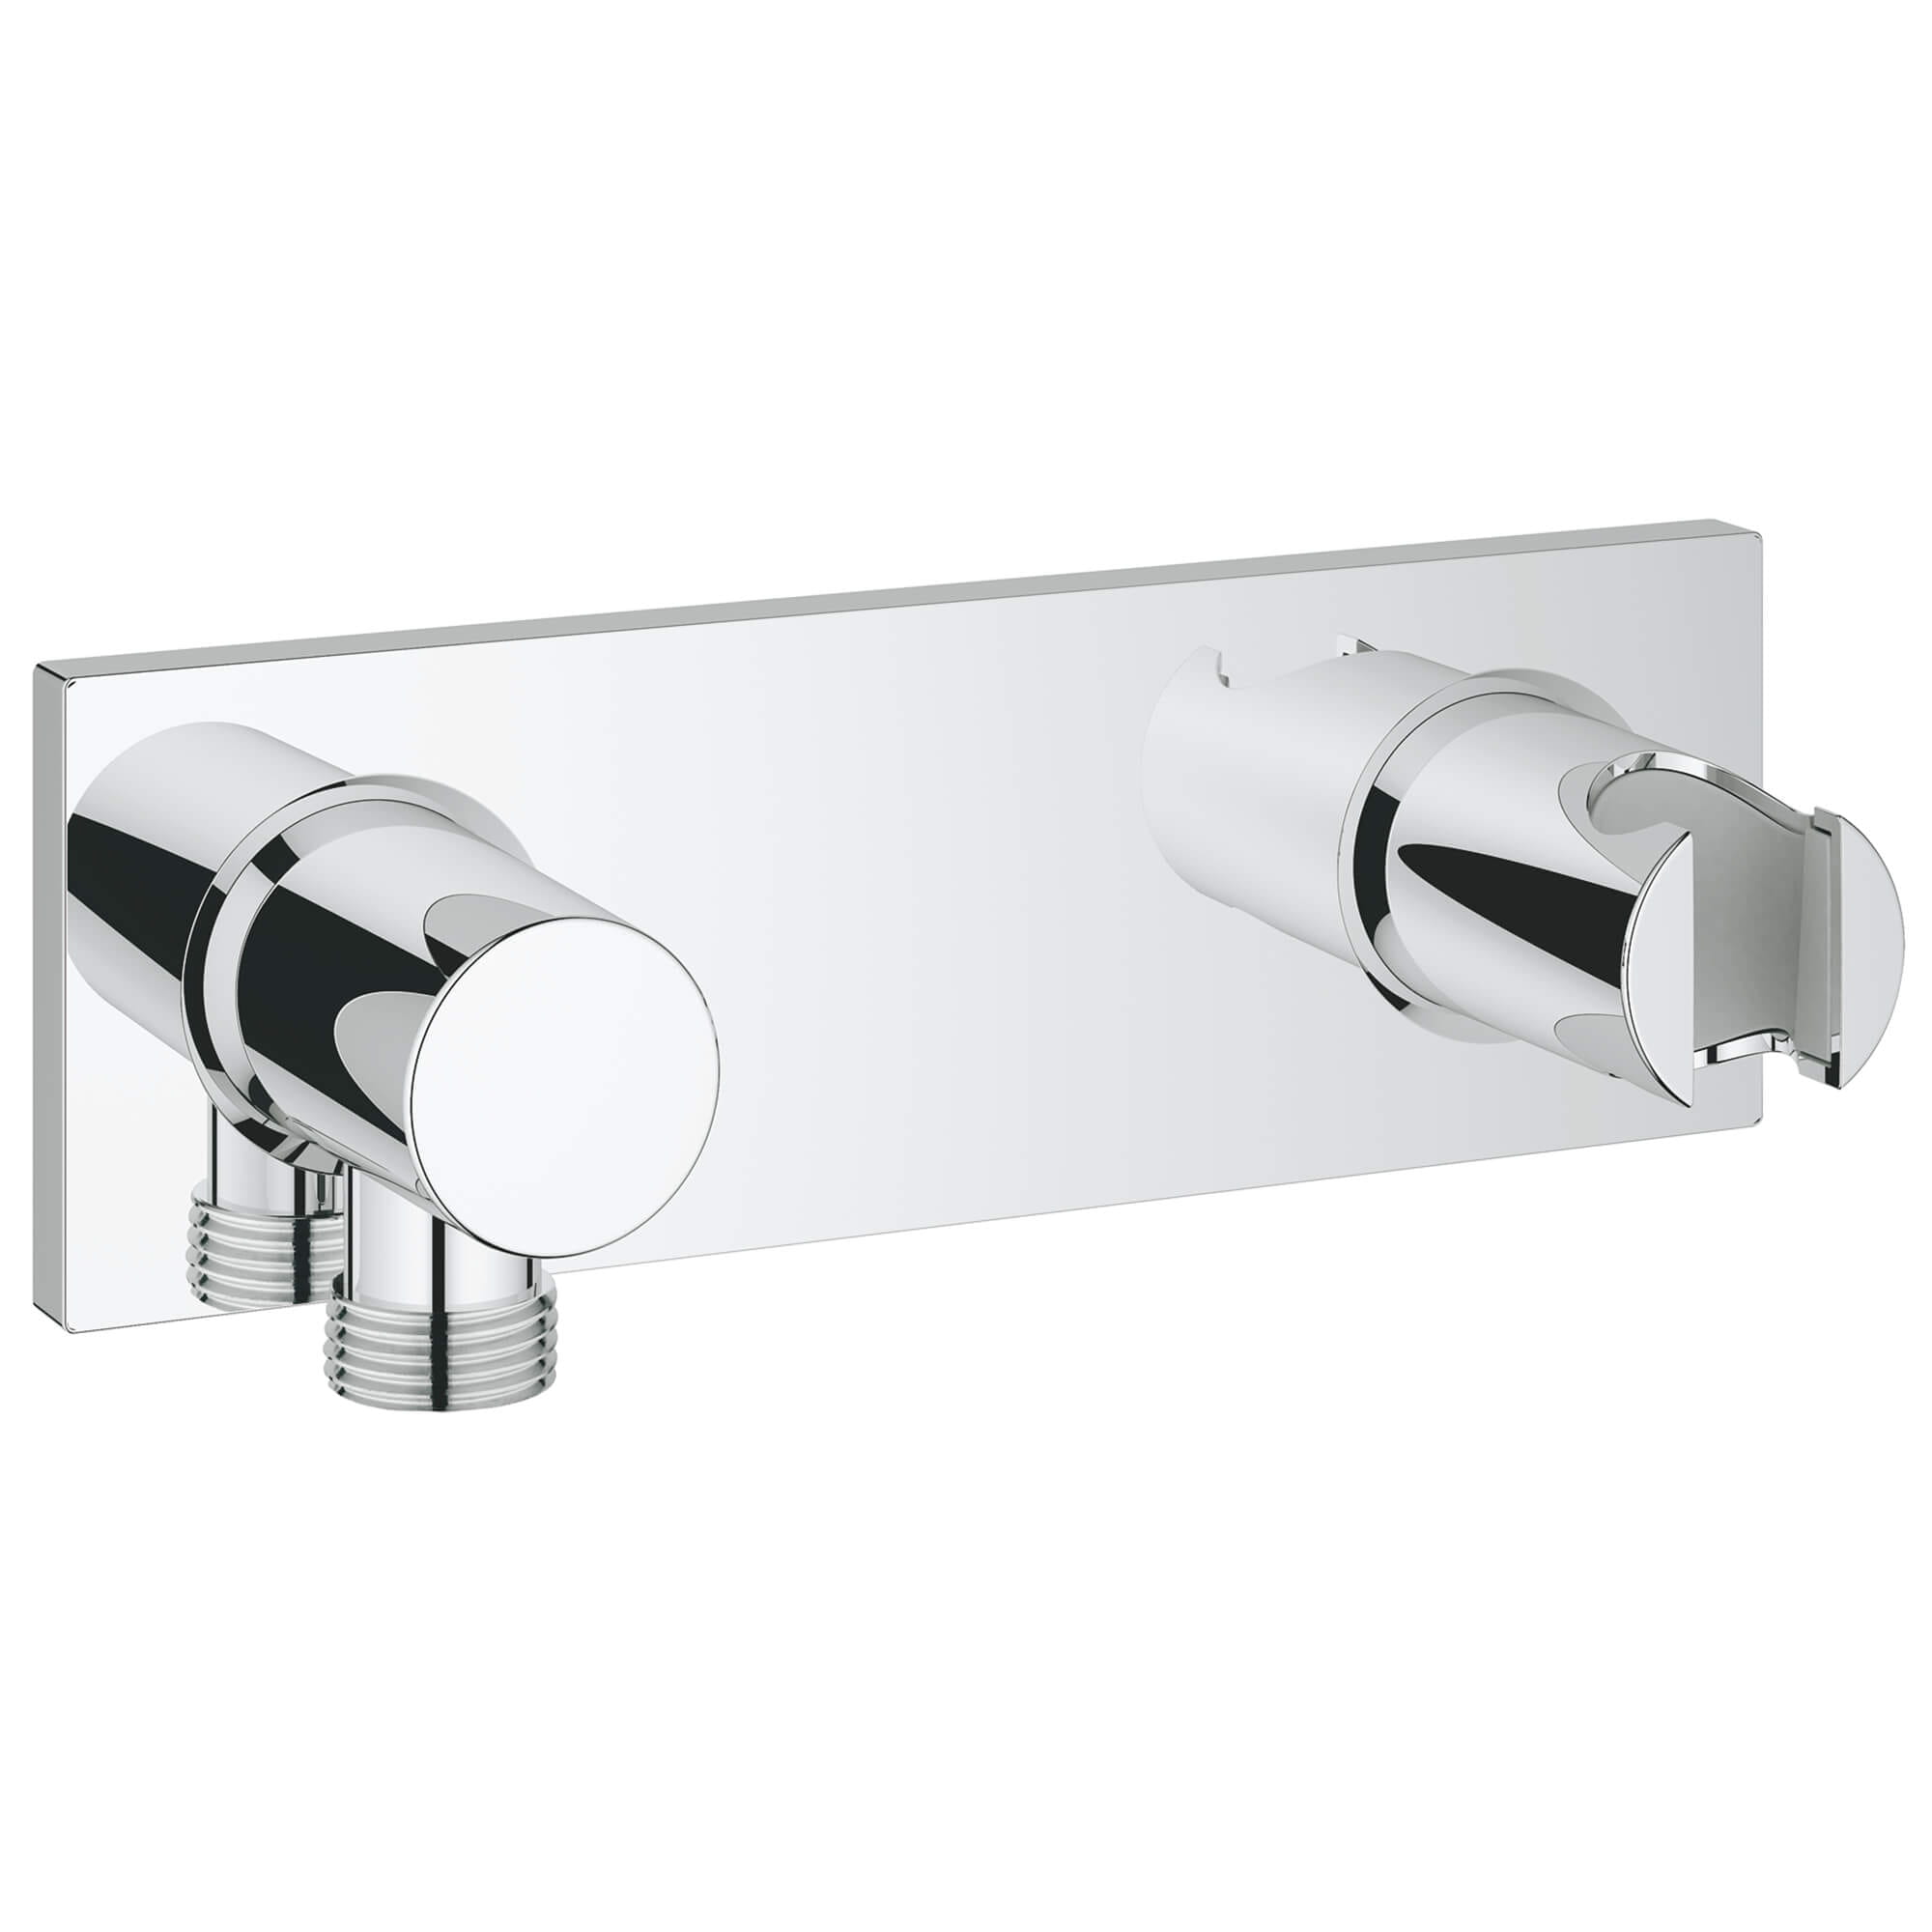 Wall Union With Integrated Hand Shower Holder GROHE CHROME